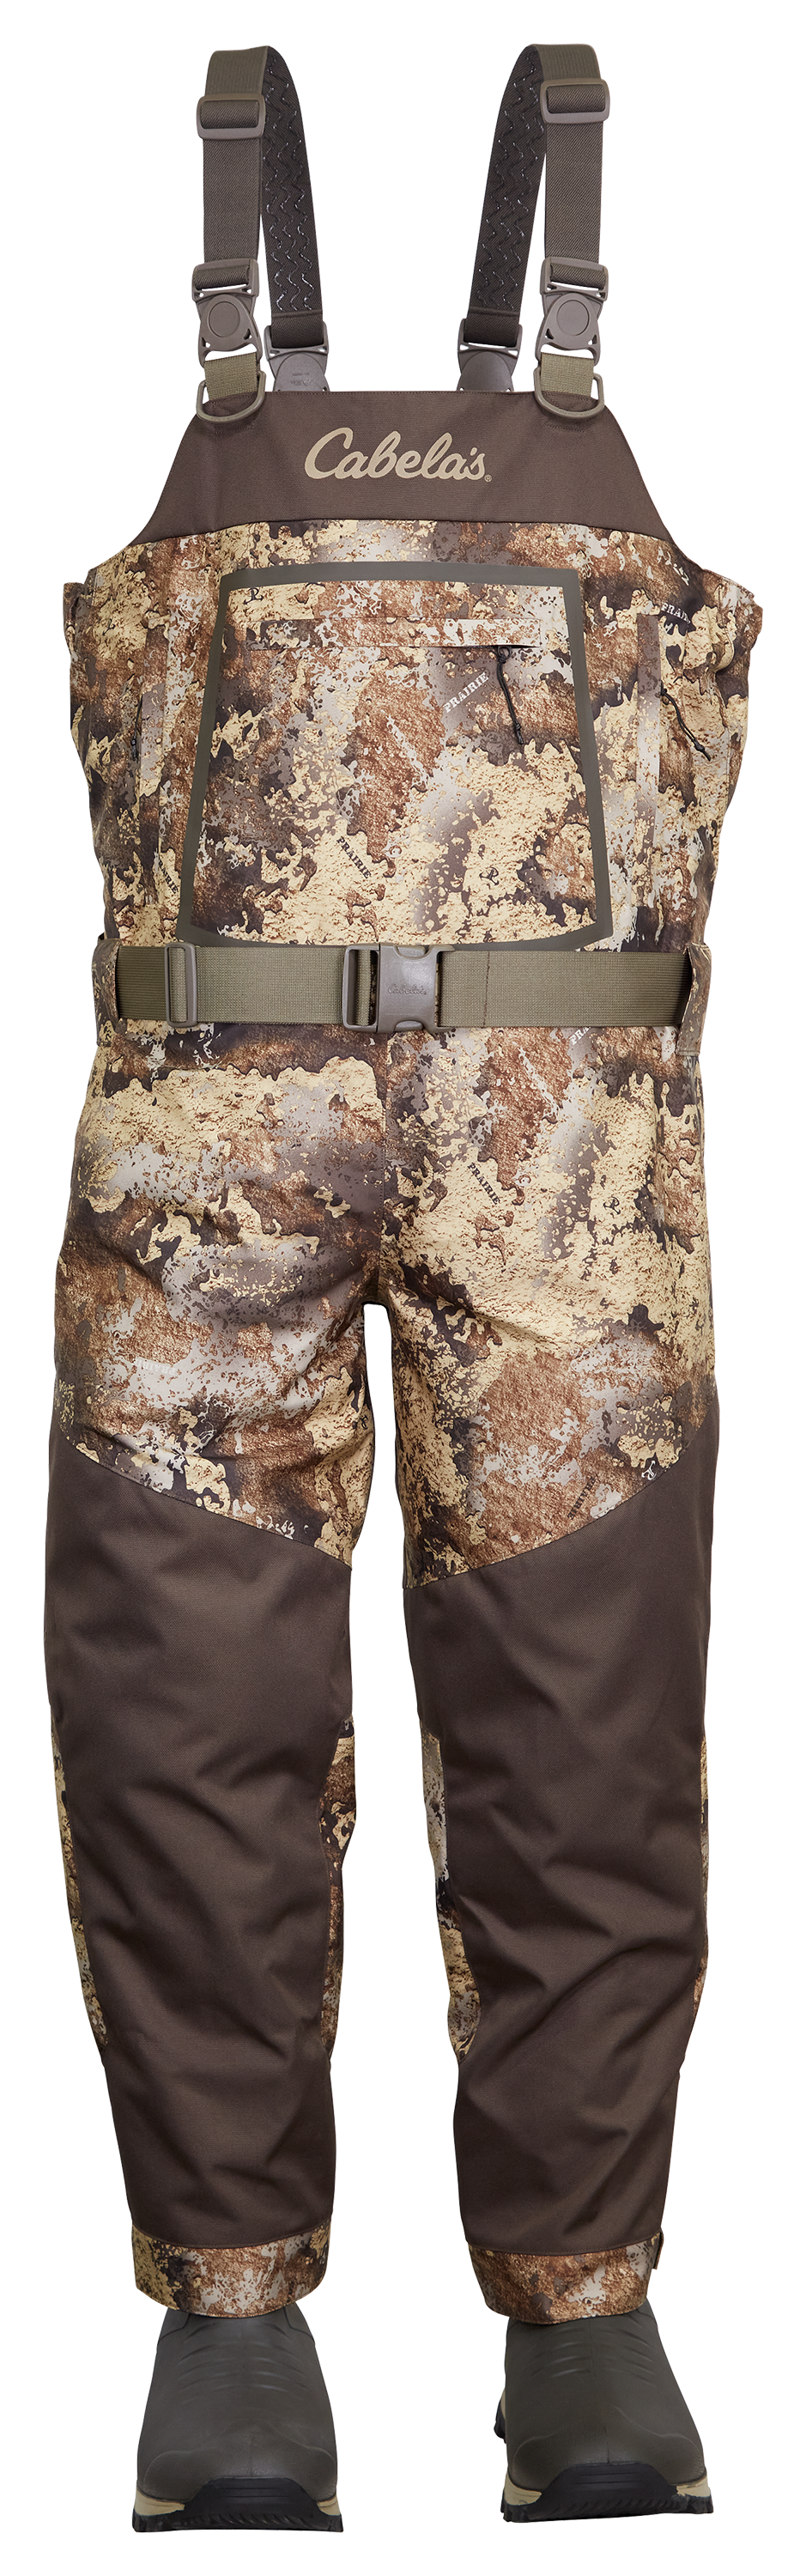 Cabelas Dry Plus Hunting/Fishing Waders Size 9 83-0086 !!